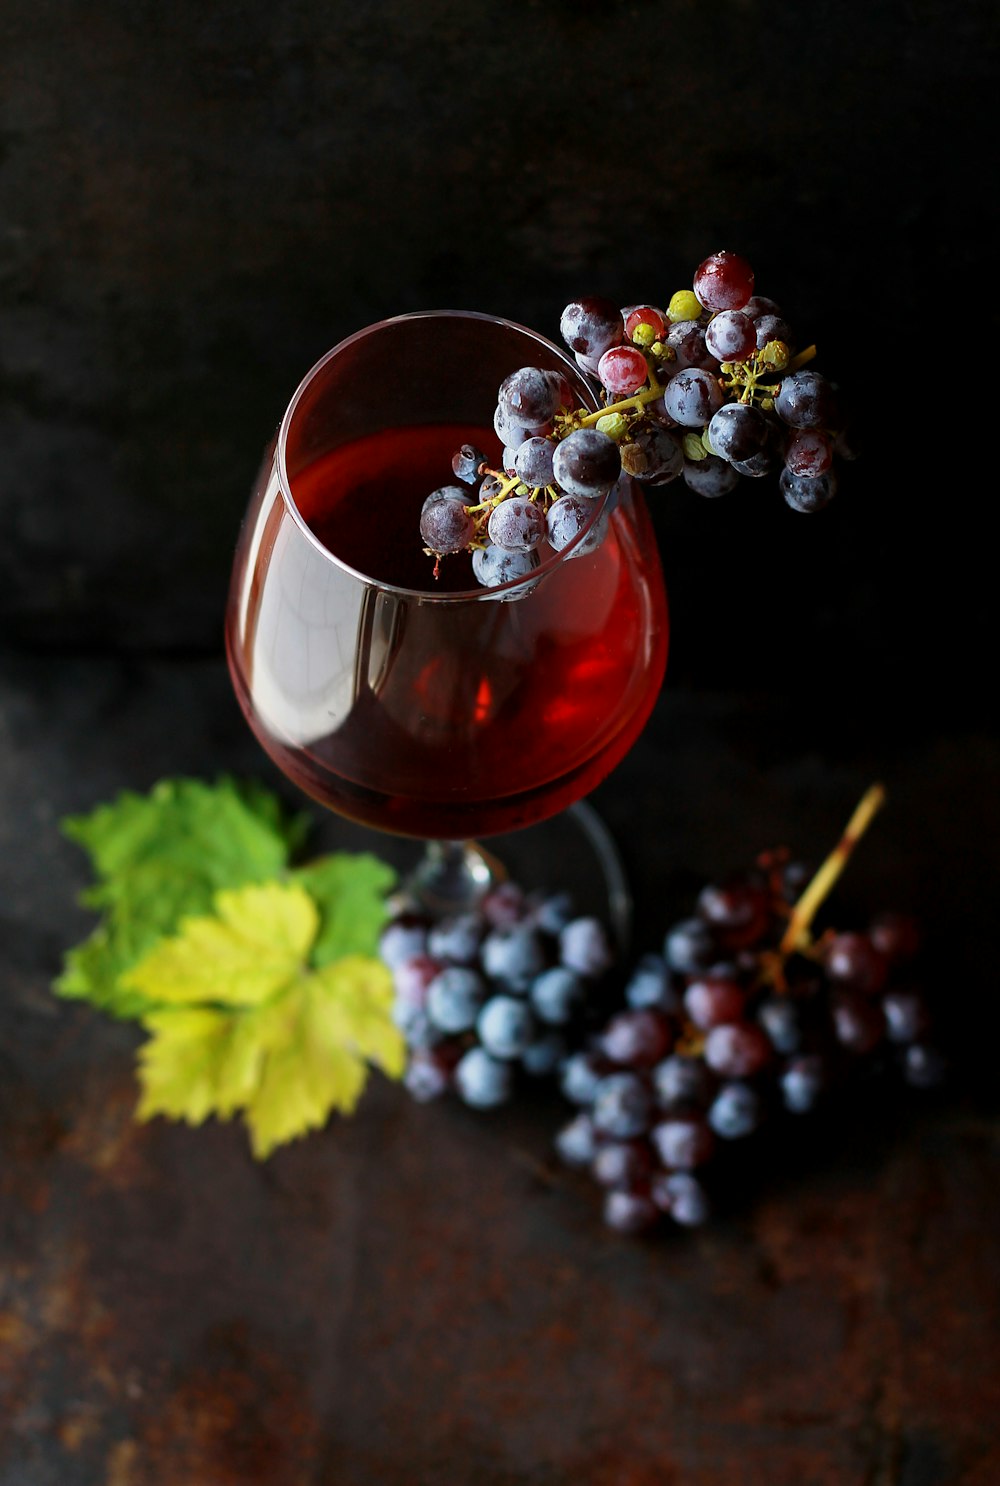 Macro view of a wine glass containing alcoholic wine with a bunch of grapes